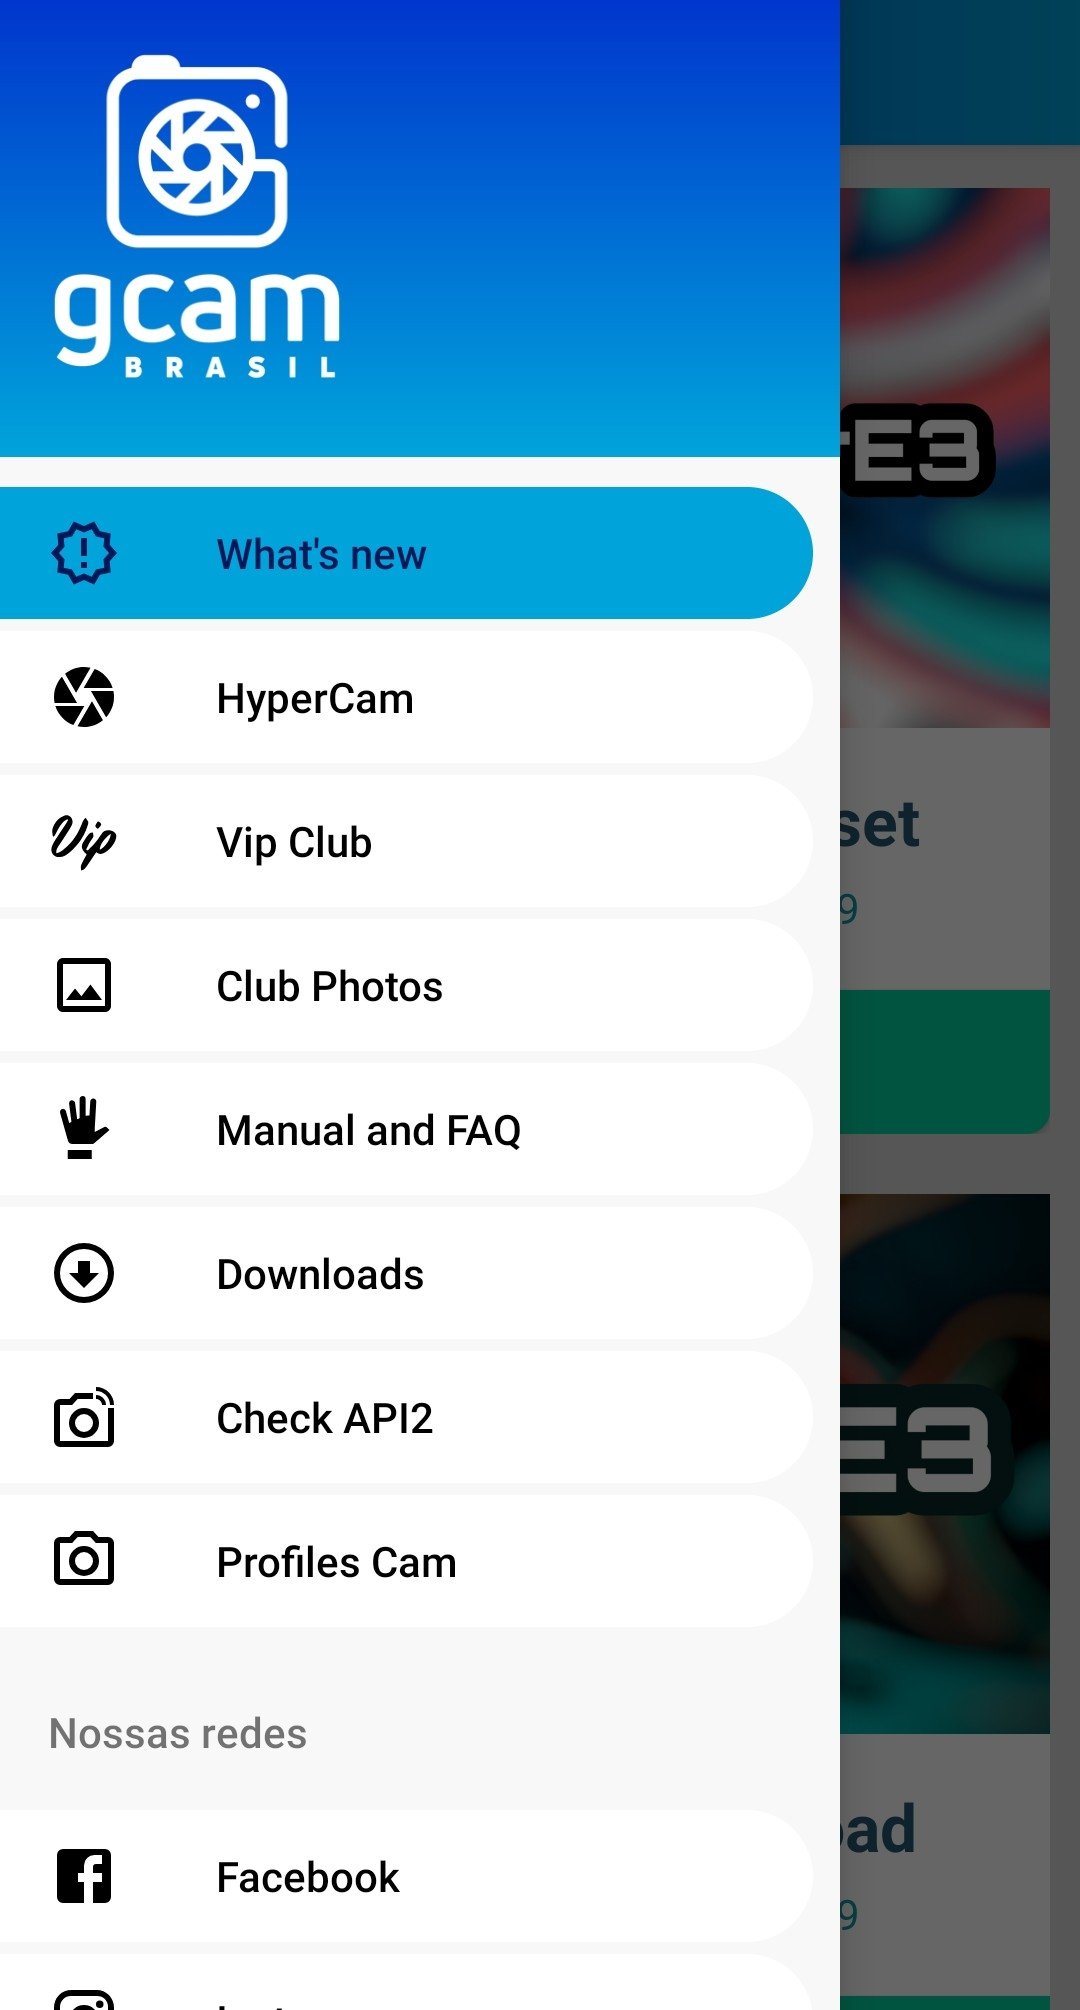 GB Clube APK 3.4.1 for Android – Download GB Clube XAPK (APK